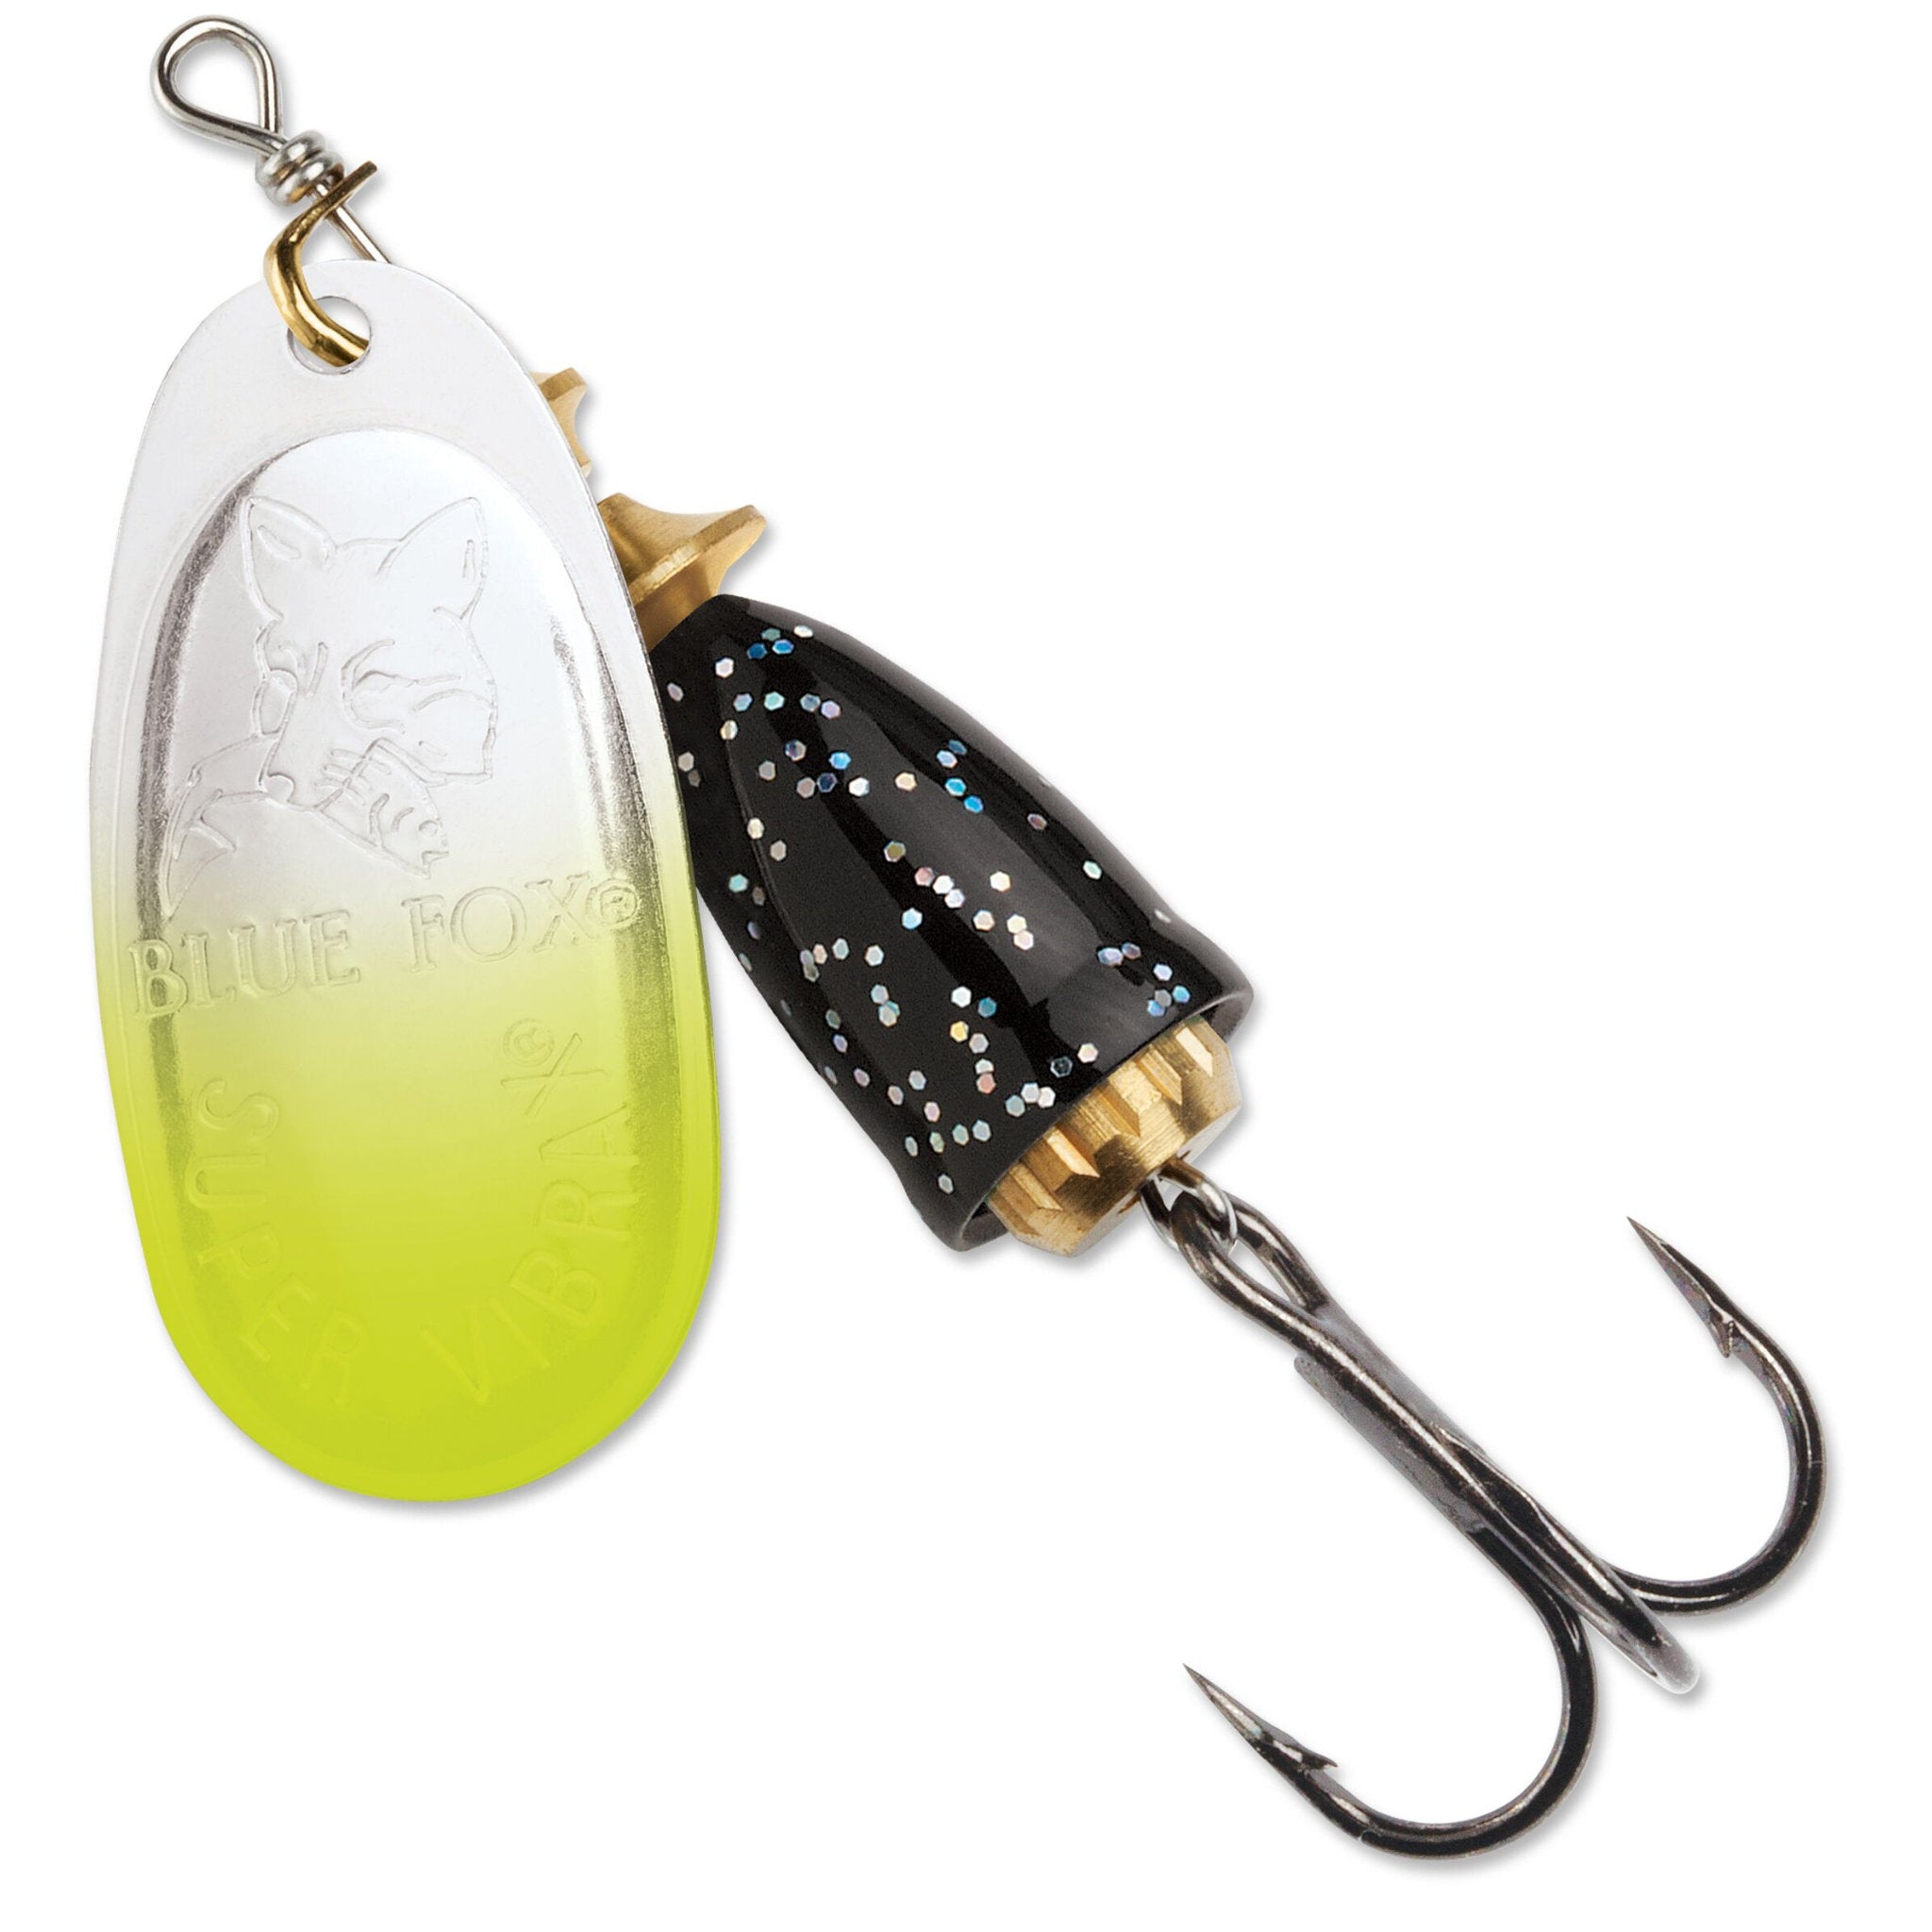  Blue Fox Vibrax Shallow Spinner 3/16 Rainbow Trout : Fishing  Spinners And Spinnerbaits : Sports & Outdoors